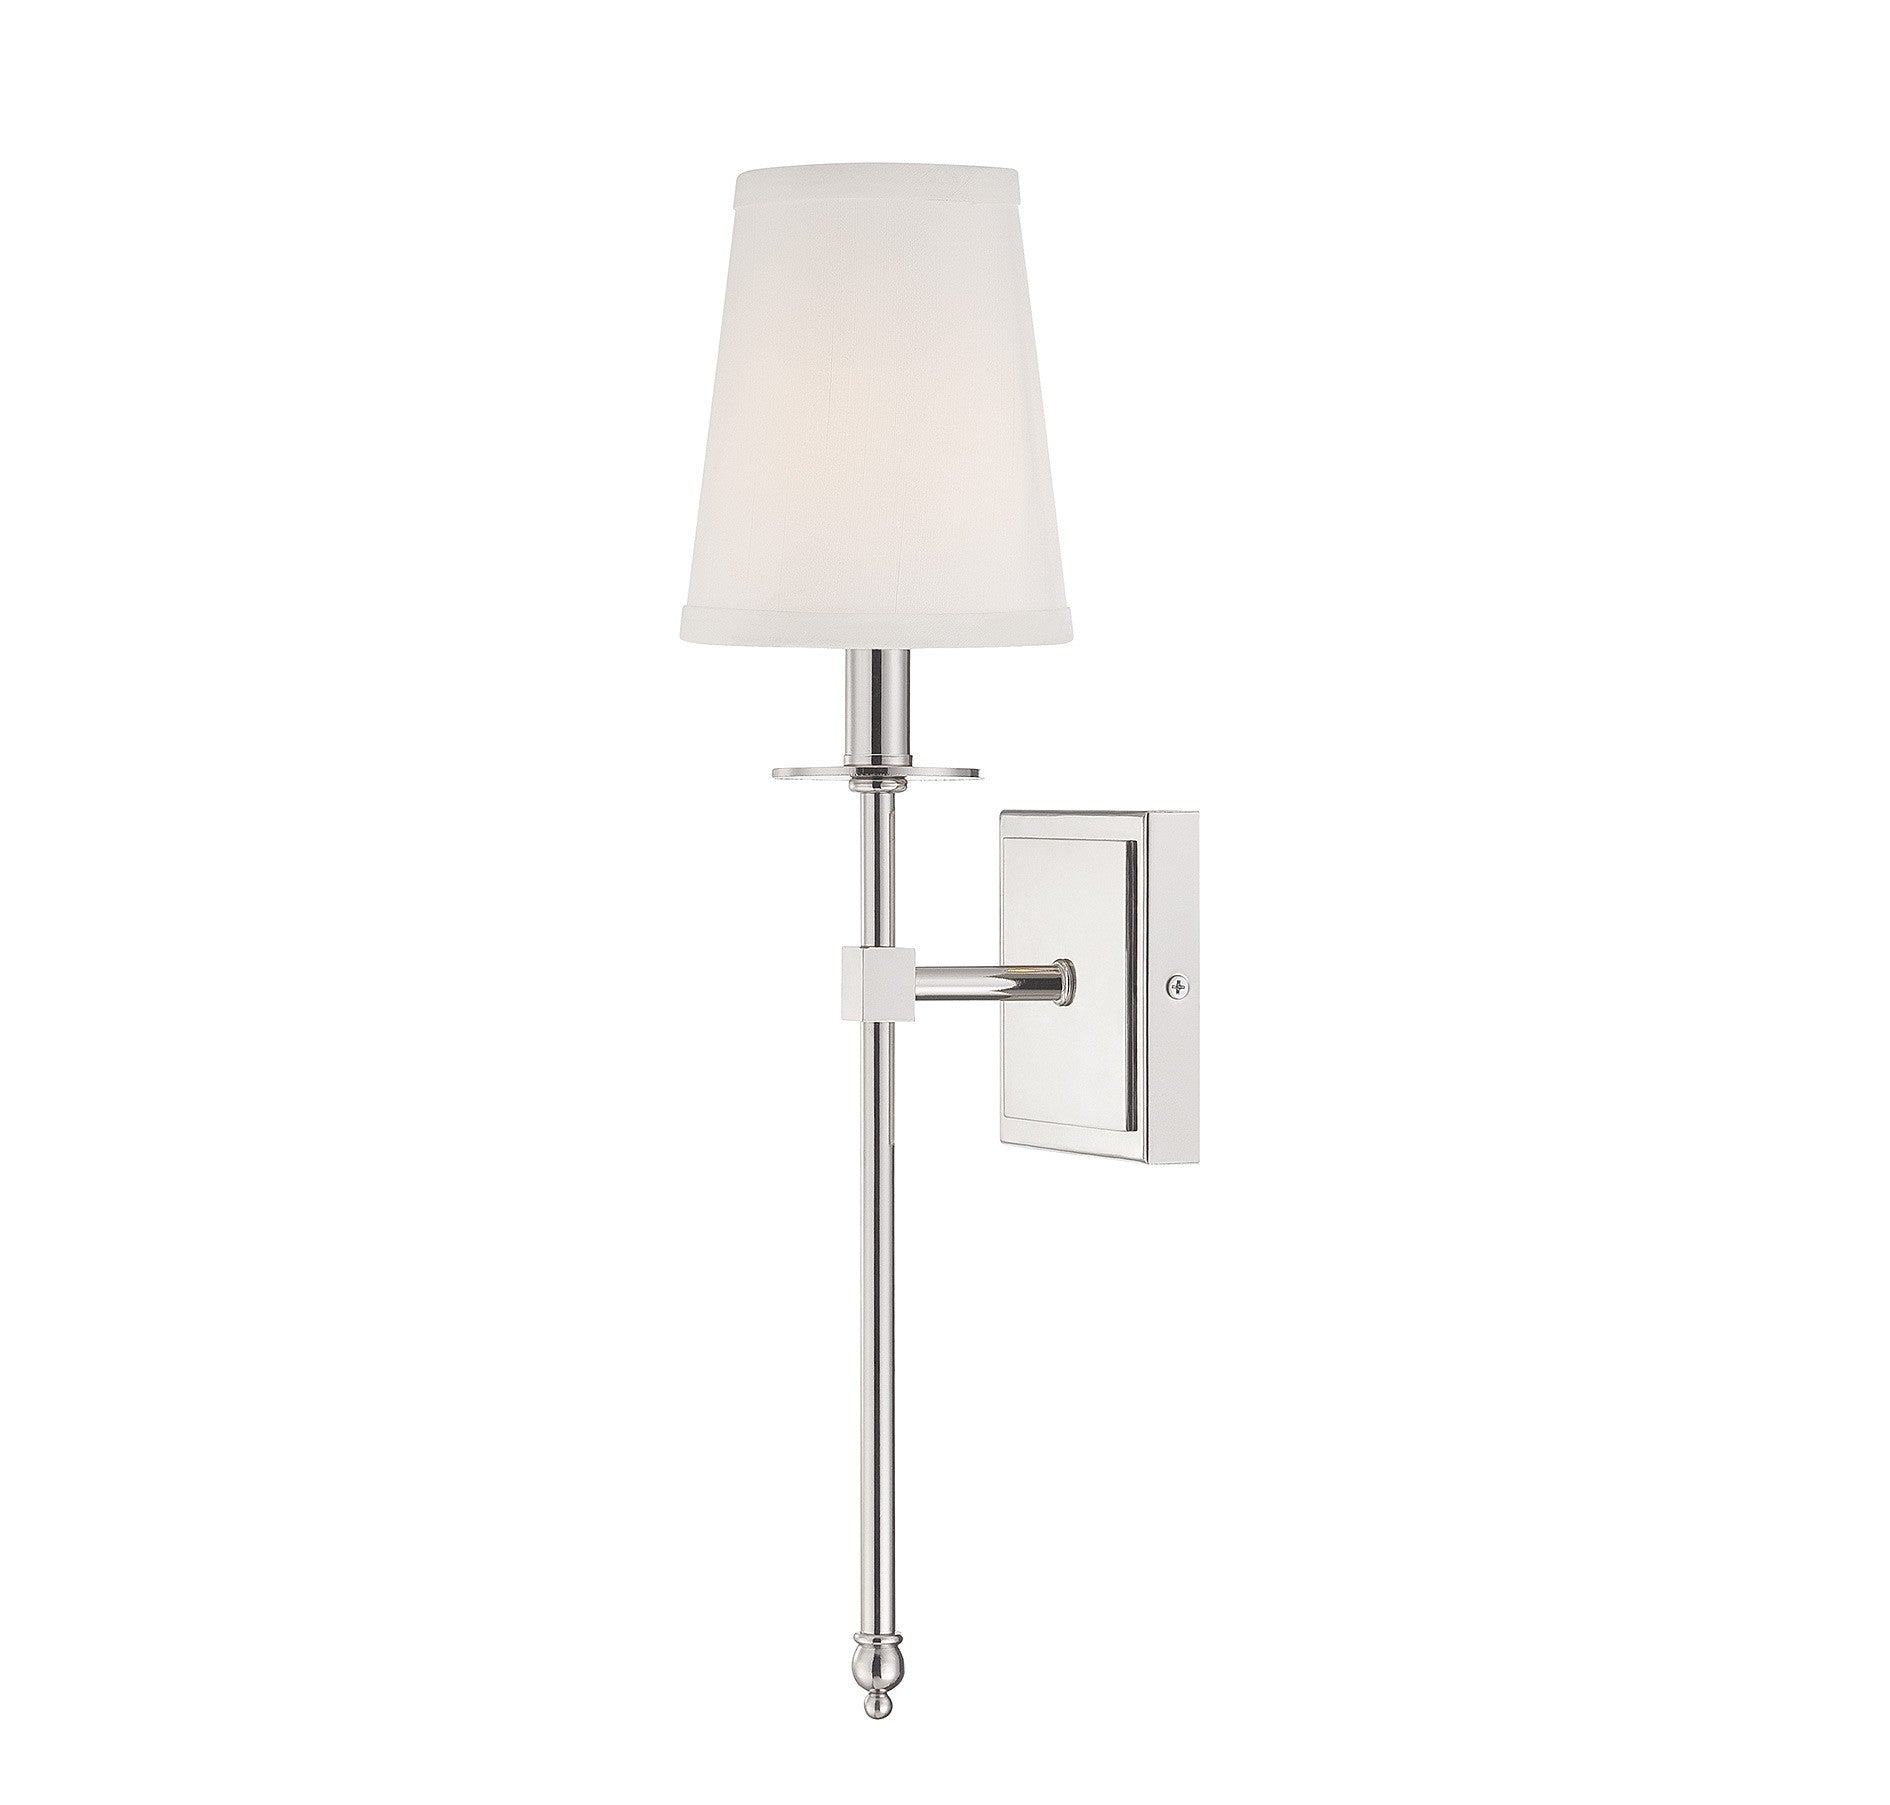 Savoy House Lighting 9-302-1-109 Monroe Collection One Light Wall Sconce in Polished Nickel Finish - Special Order Item